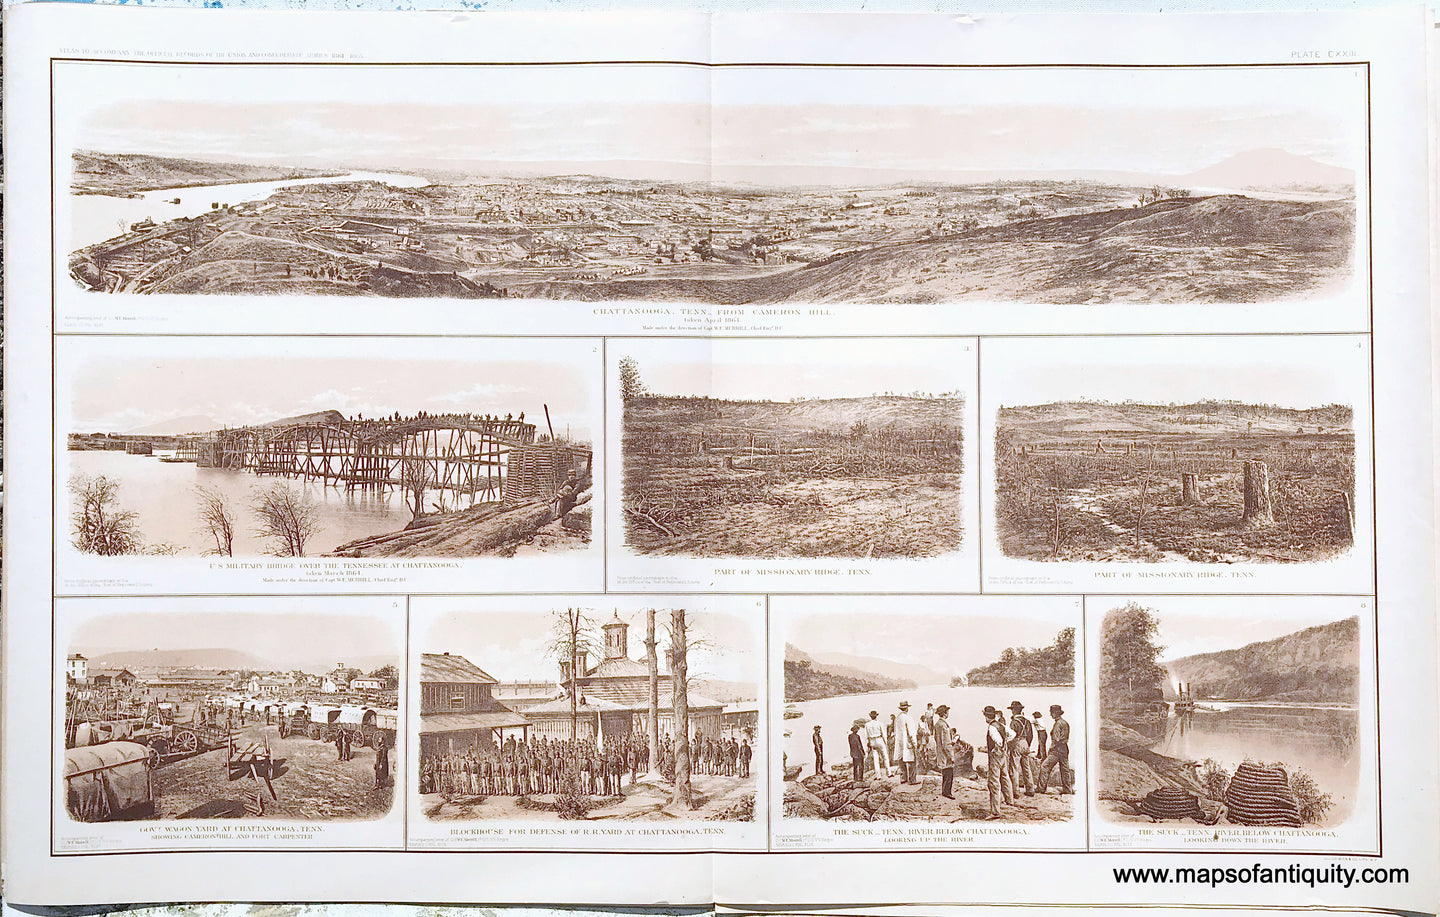 Antique-Lithograph-Print-Plate-123.-Photographic-panoramic-view-of-Chatttanooga-Tenn.-from-Cameron-Hill.-taken-April-1864-/-Seven-photographic-views-of-and-vicinity-of-Chattanooga-Missionary-Ridge-and-The-Suck-Tennessee-River.-1894-US-War-Dept.-Civil-War-Civil-War-1800s-19th-century-Maps-of-Antiquity